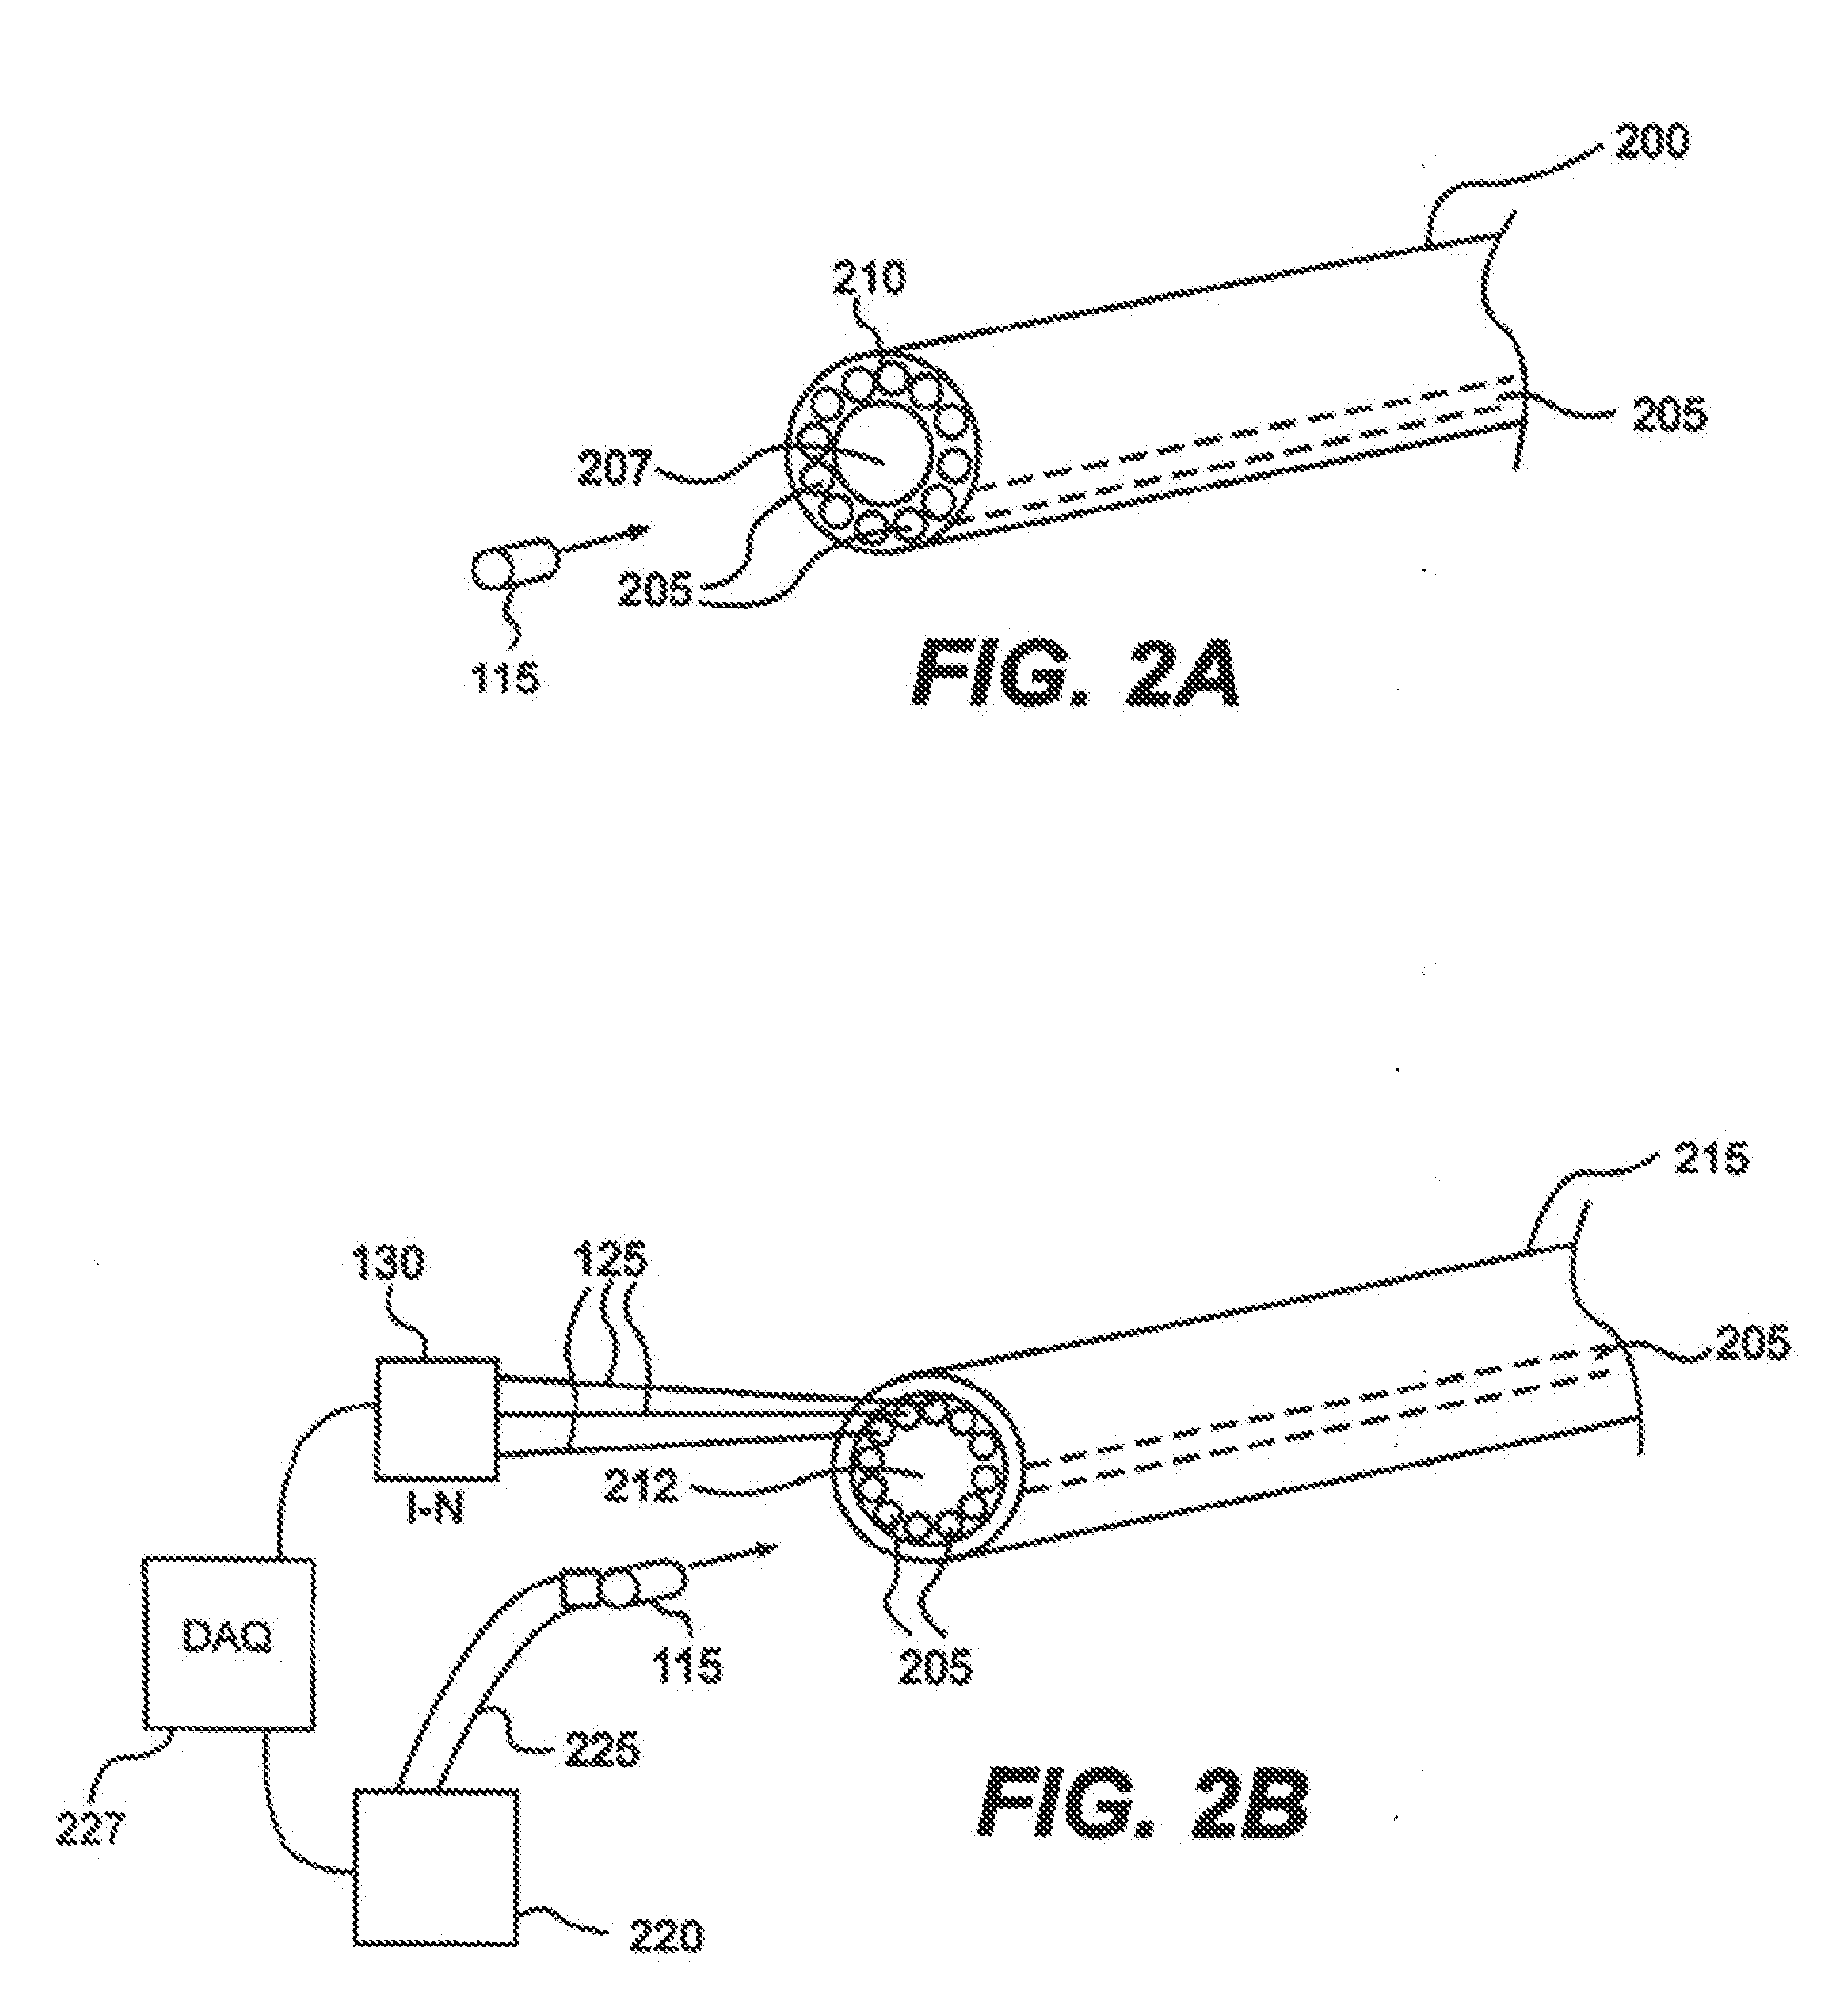 Apparatus and method for external beam radiation distribution mapping